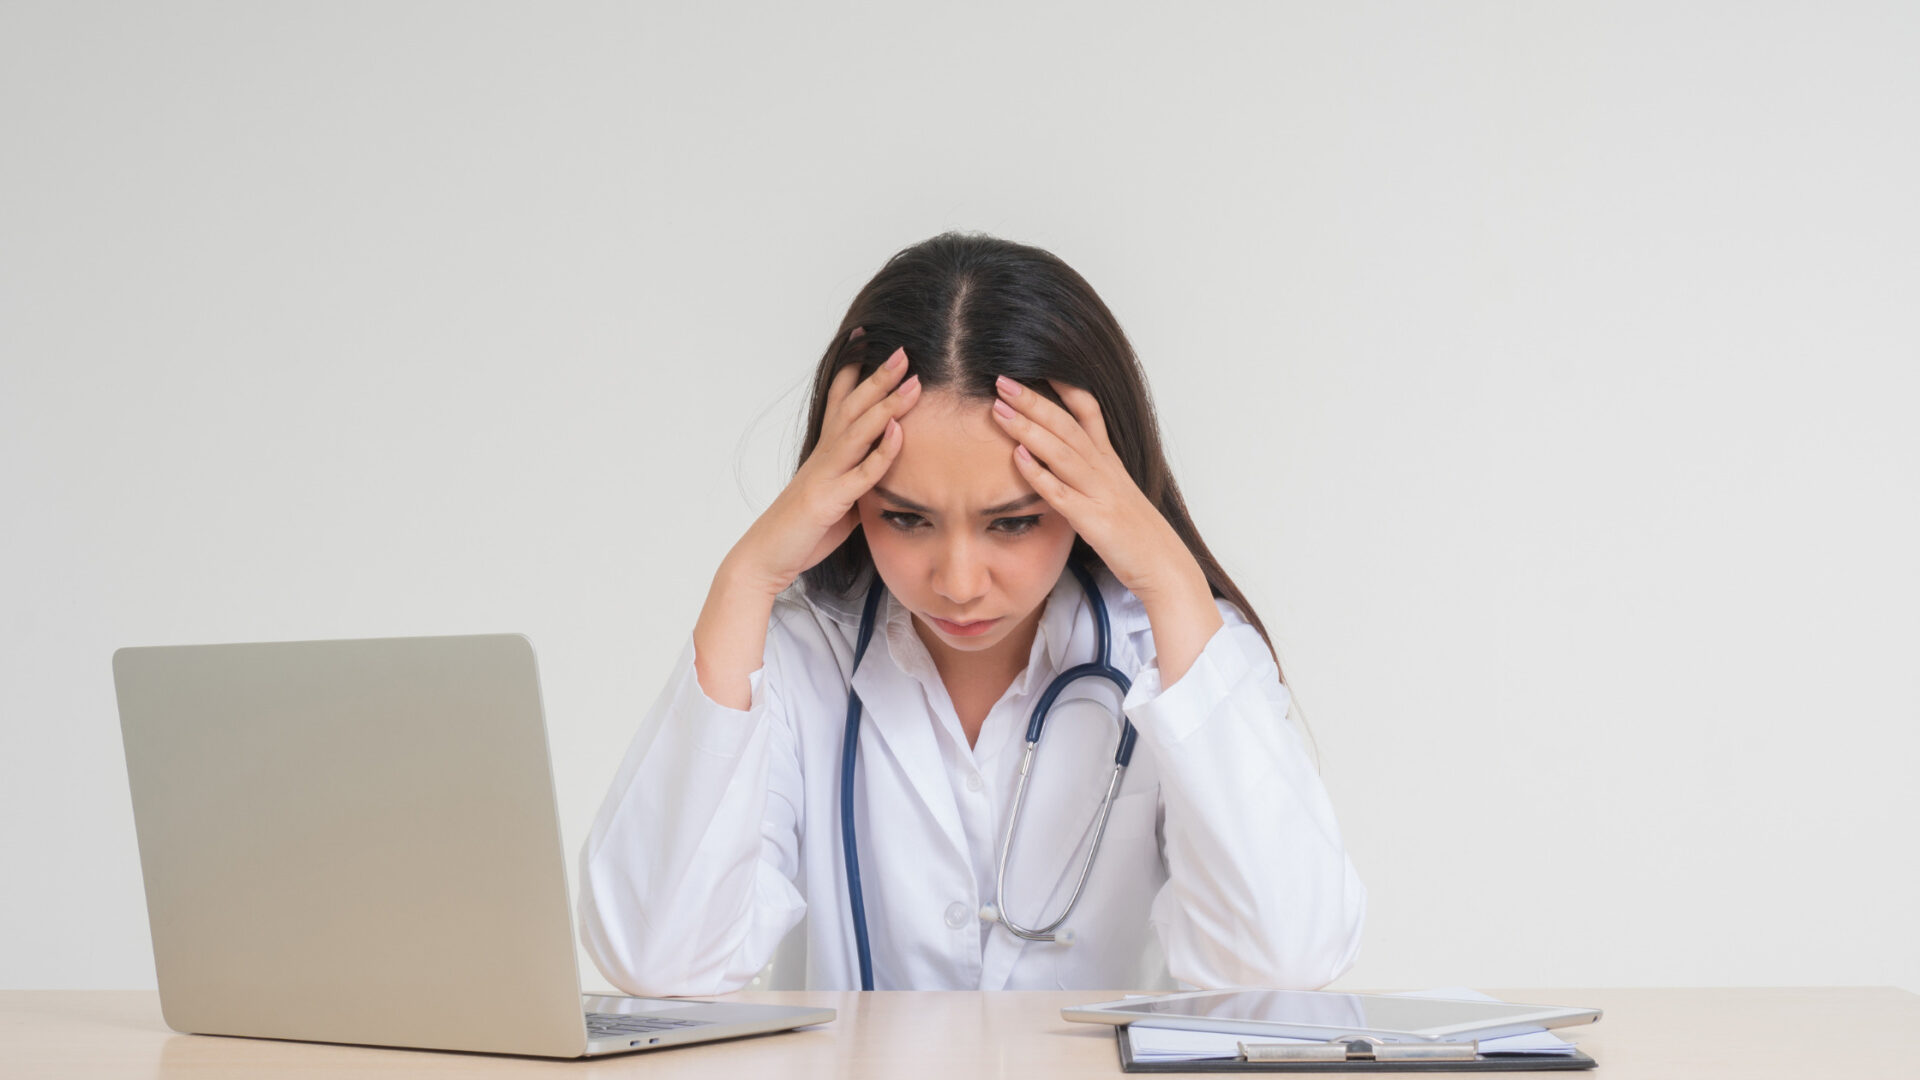 Contractual issues for Women Physicians